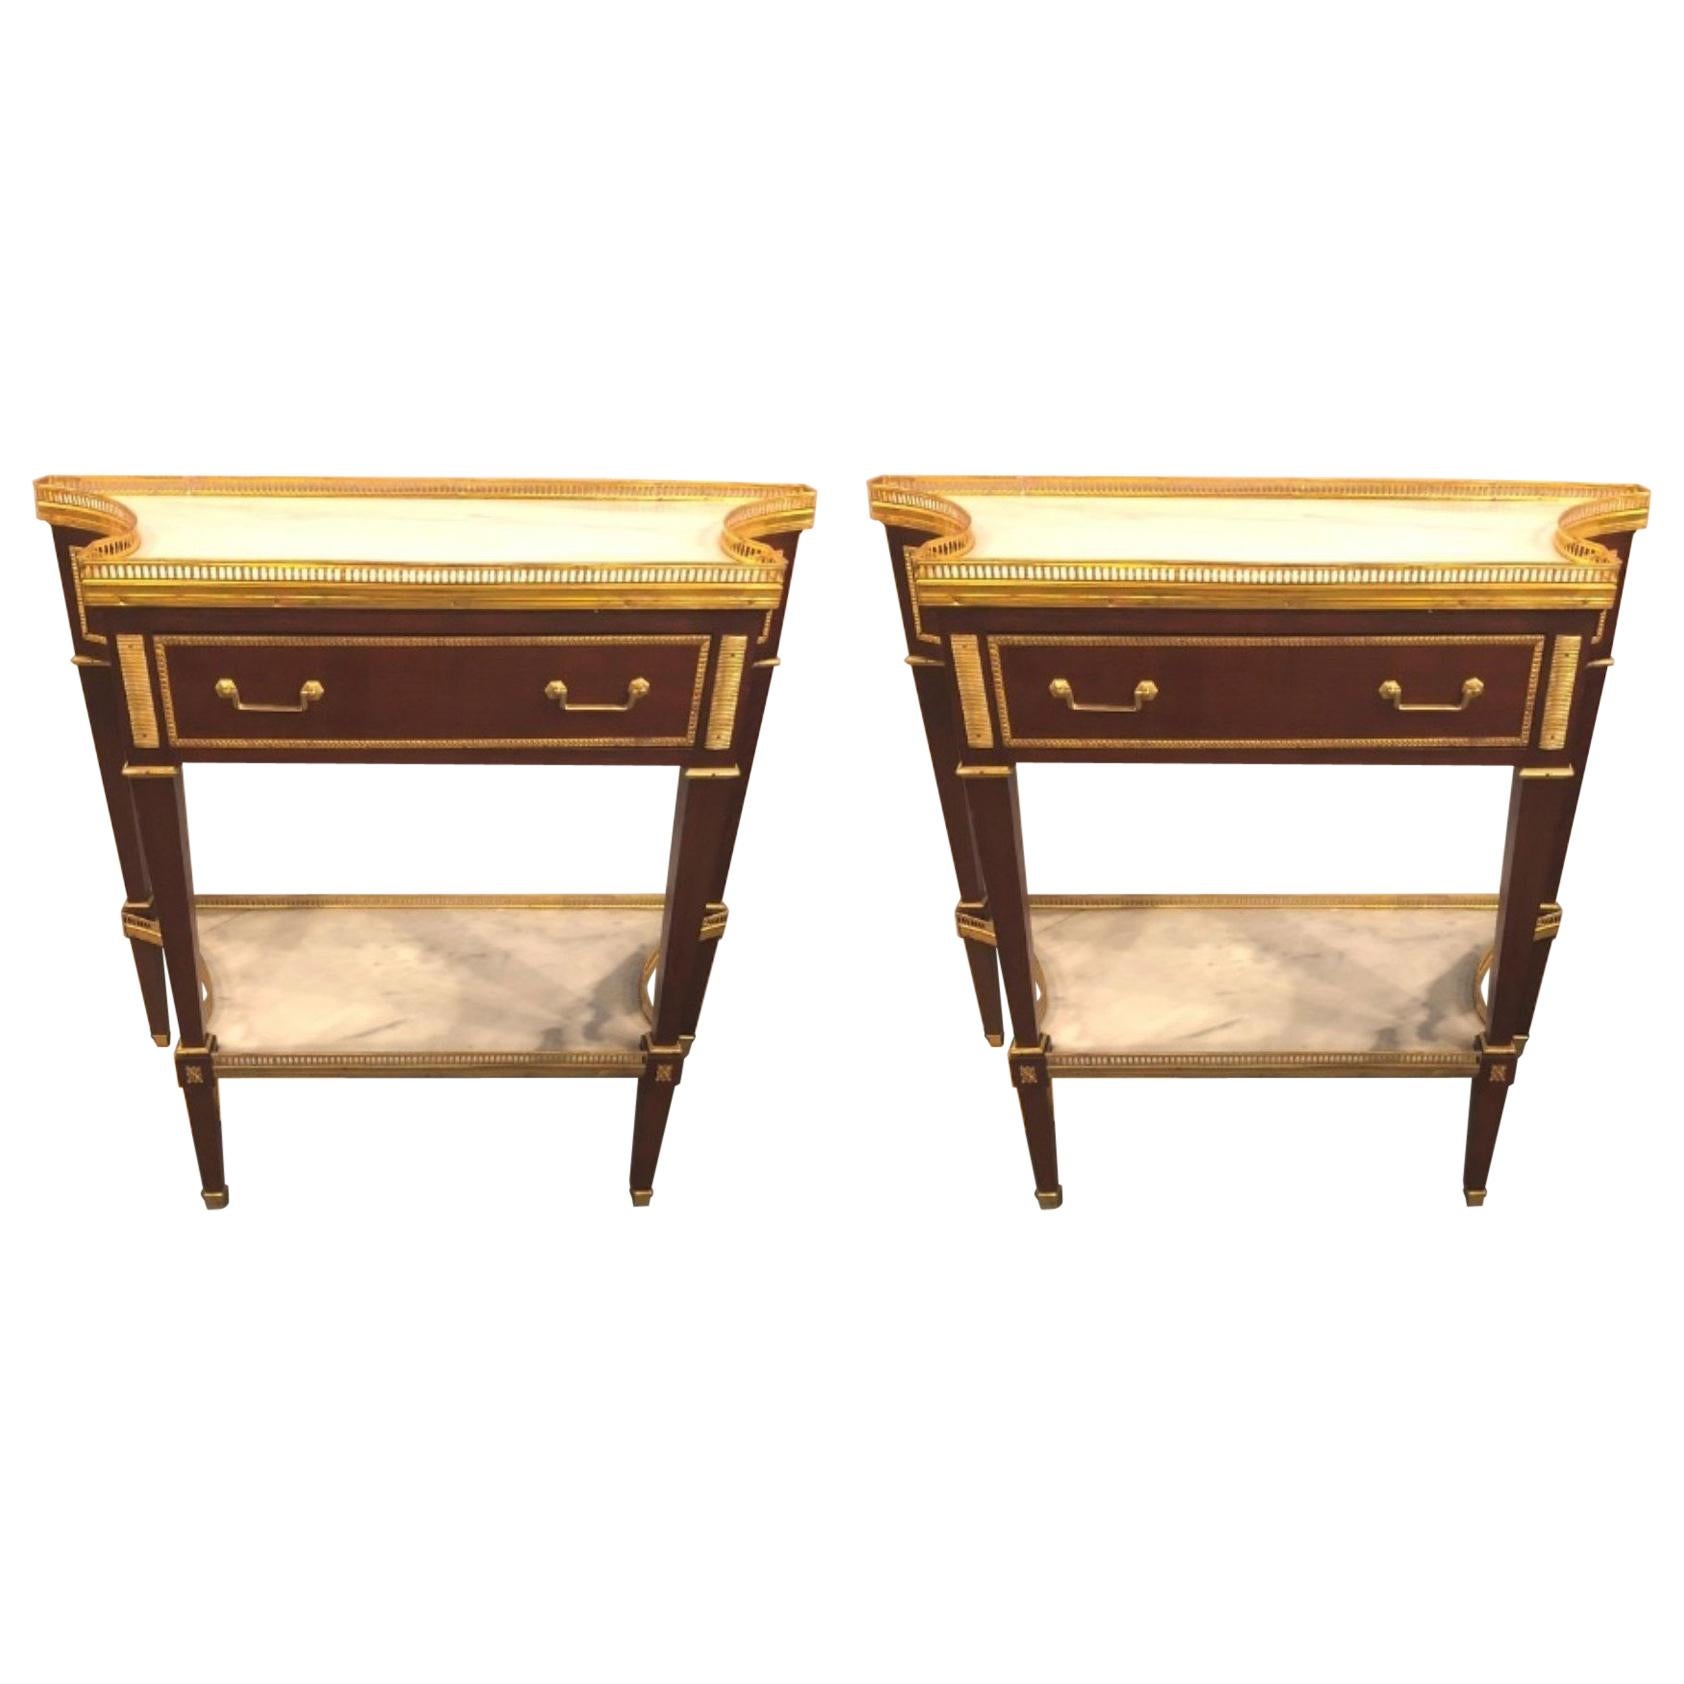 Pair of Russian Neoclassical Style Consoles/Servers or Commodes with Marble Tops